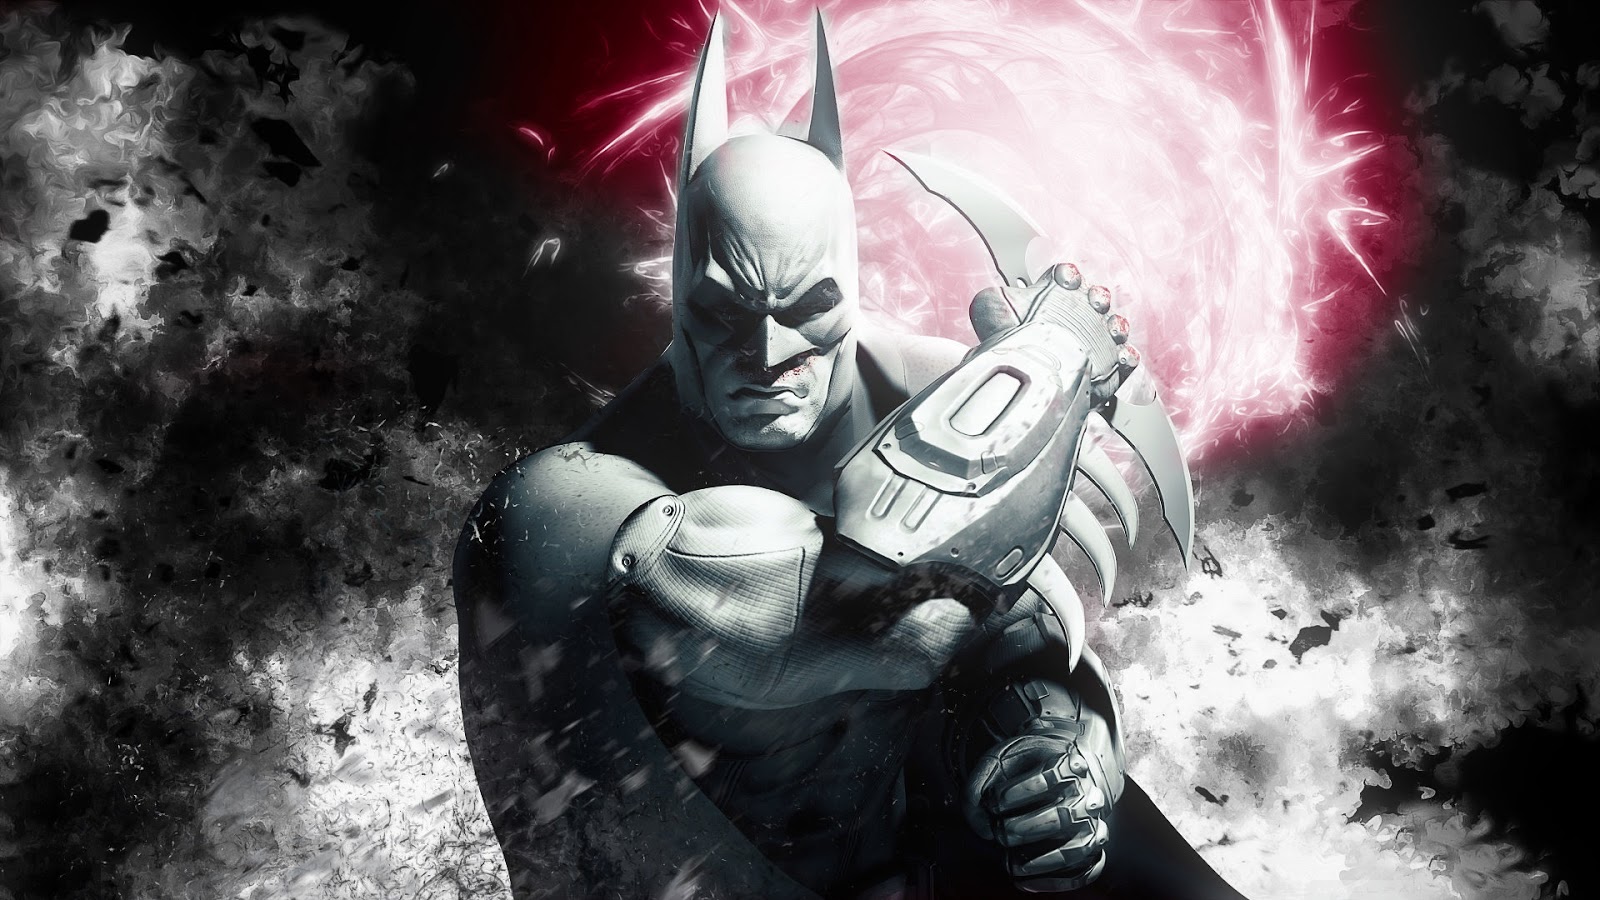 Batman New HD Wallpapers 2013 All About HD Wallpapers